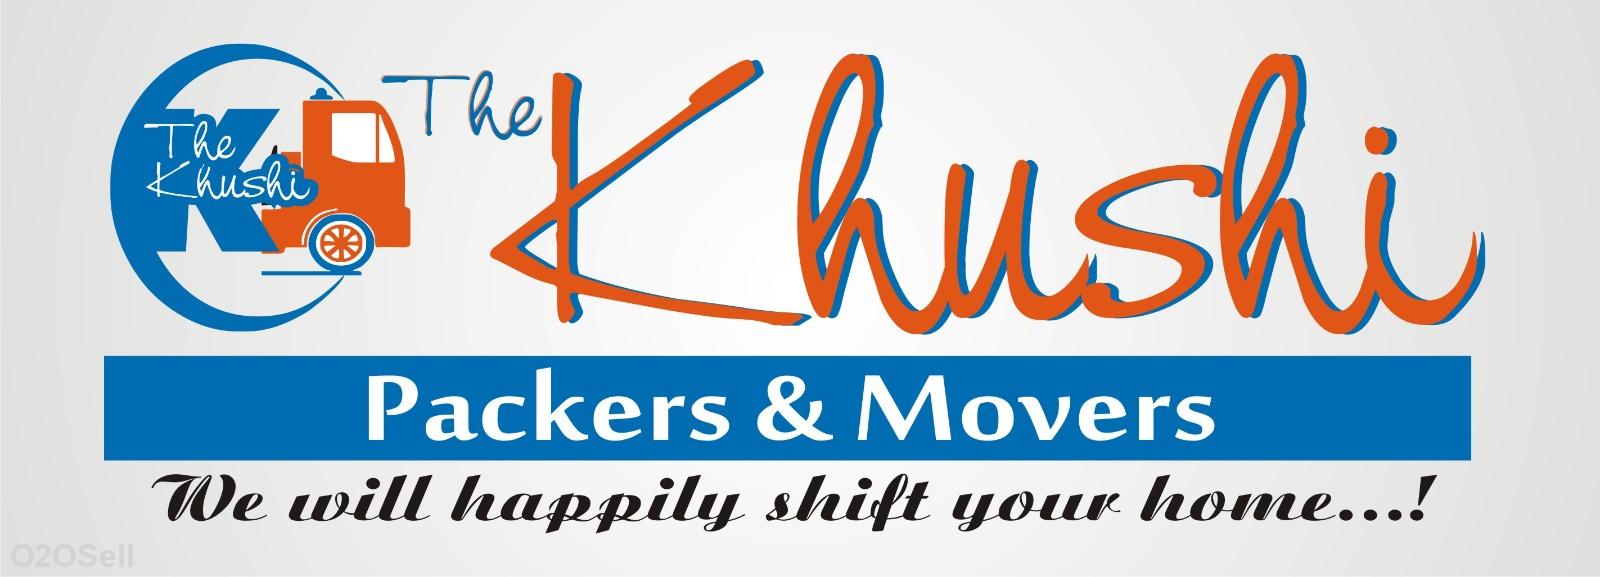 The Khushi Packers And Movers Mumbai  - Cover Image